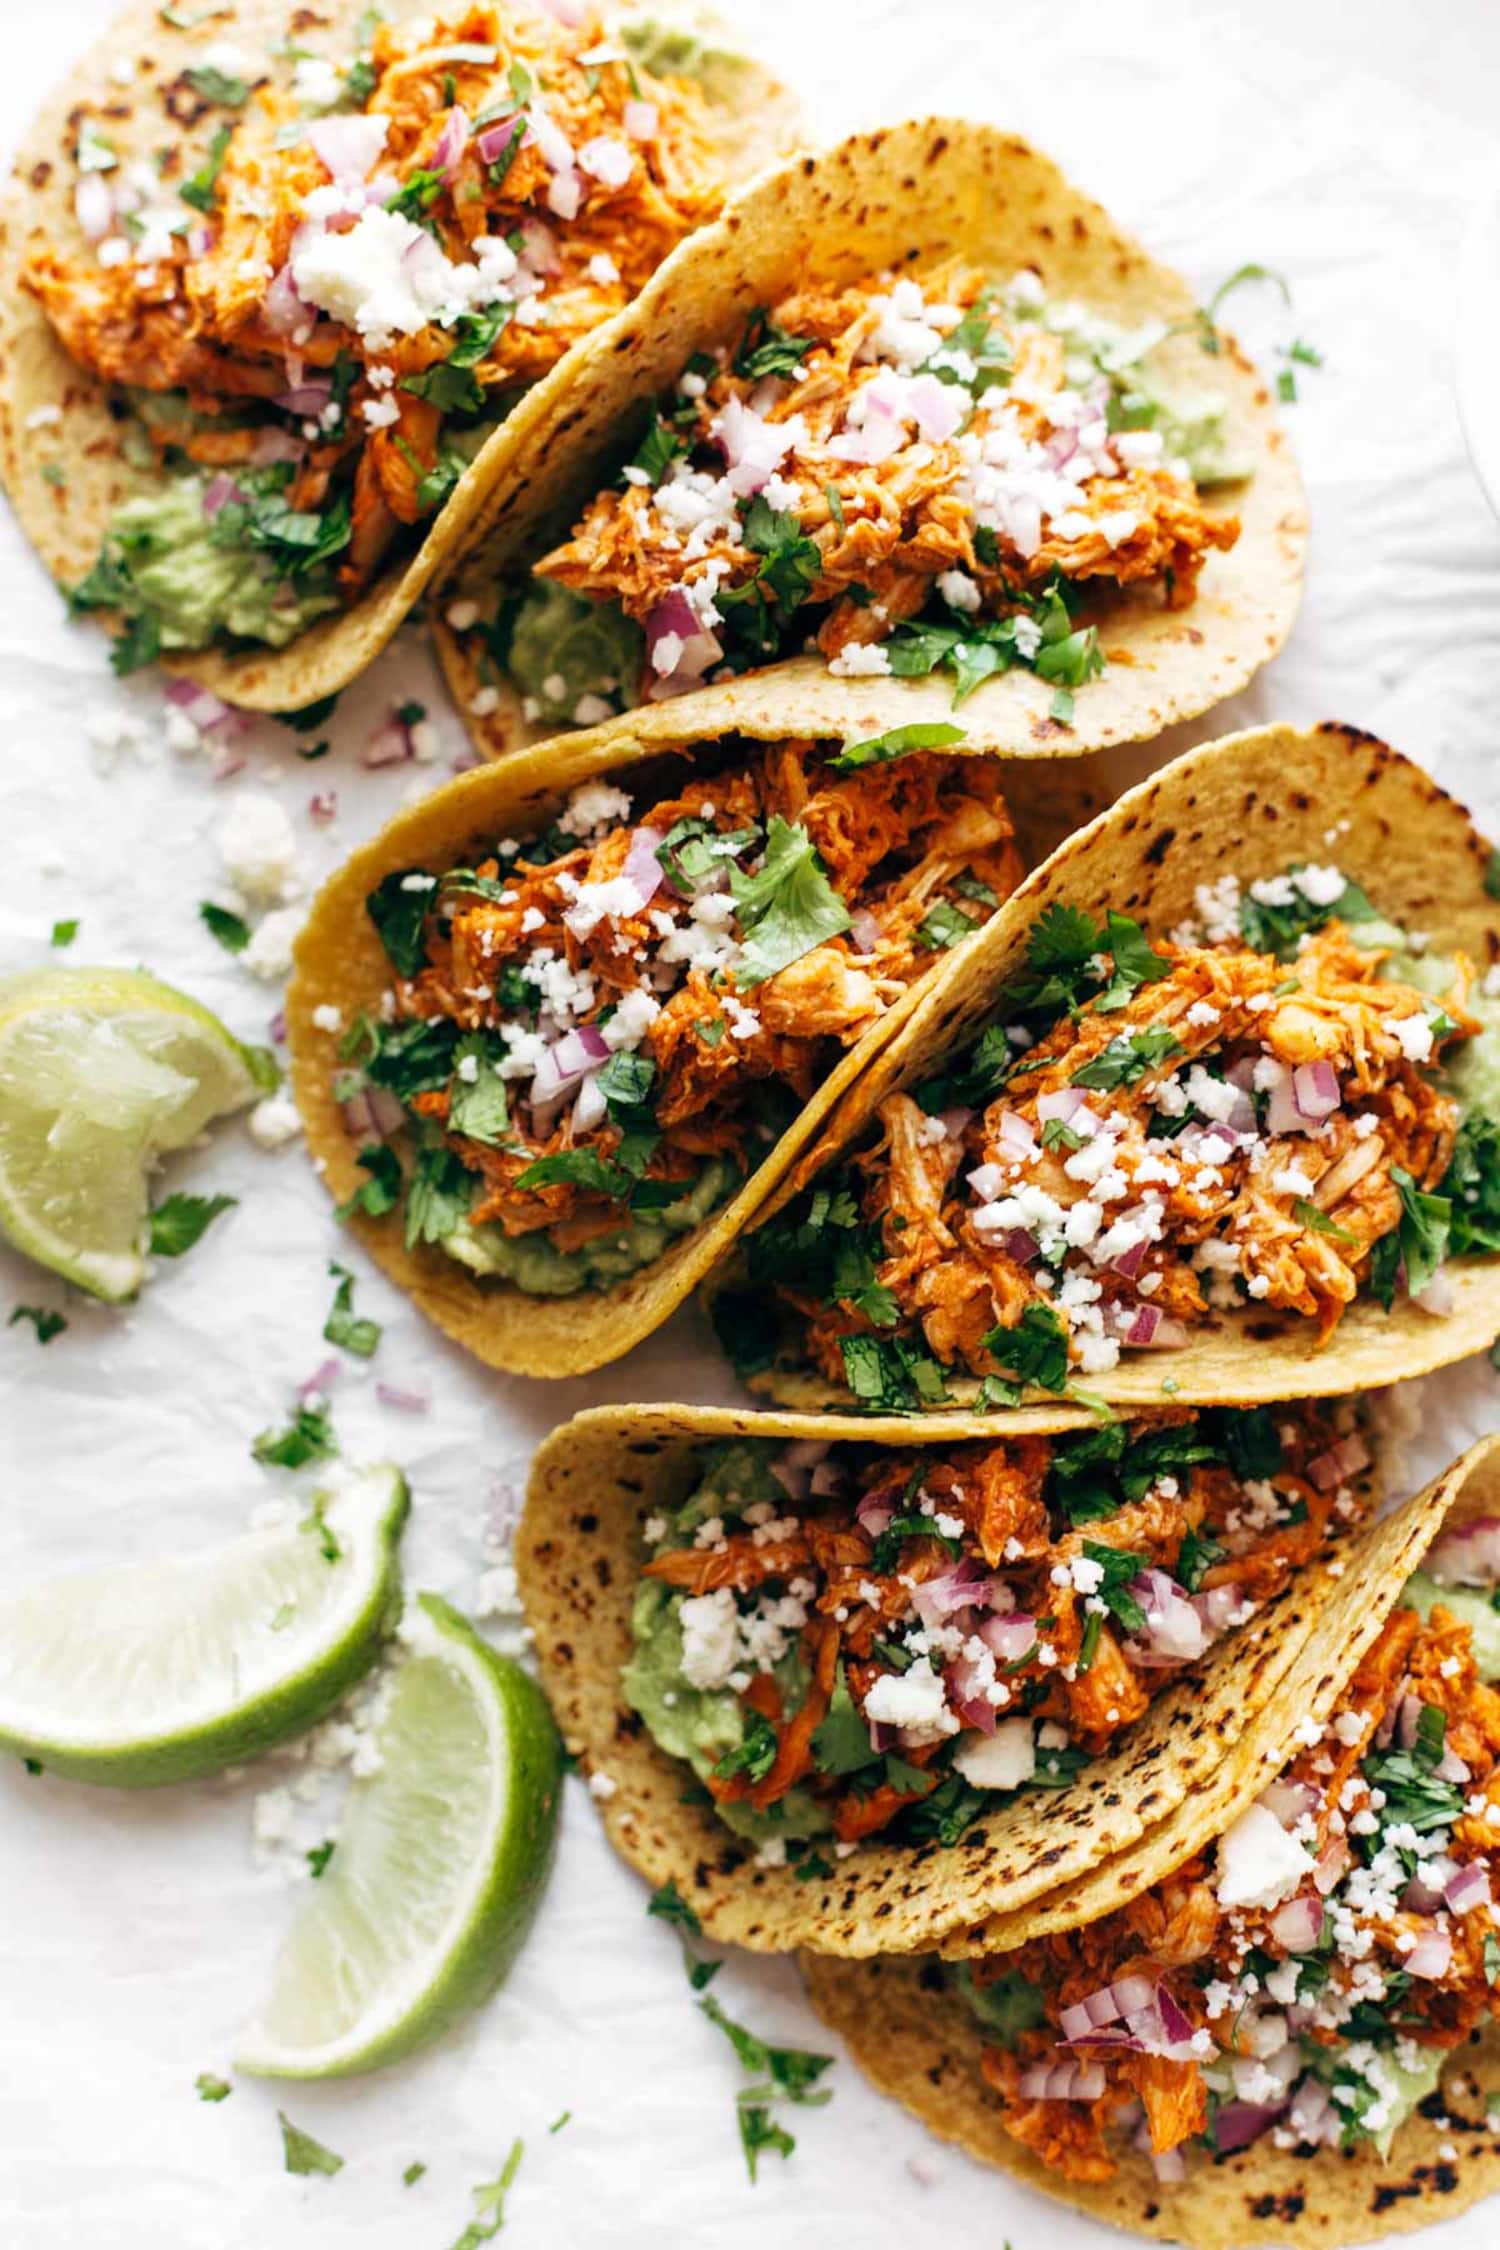 These Chicken Tinga Tacos Can Be on Your Table in 20 Minutes | Kitchn